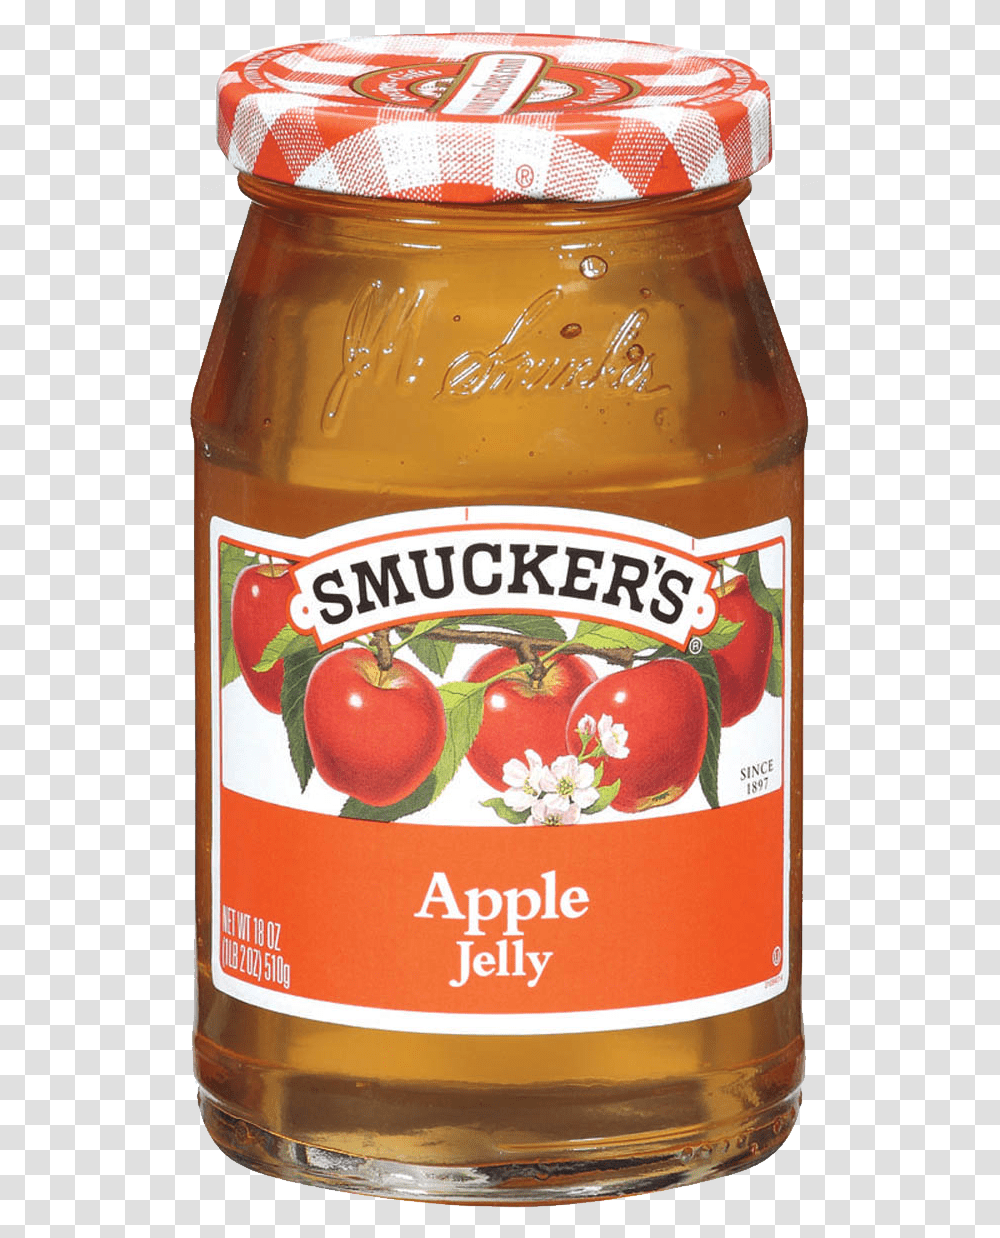 Jam Images Free Smuckers Apple Jelly, Food, Ketchup, Beer, Alcohol Transparent Png